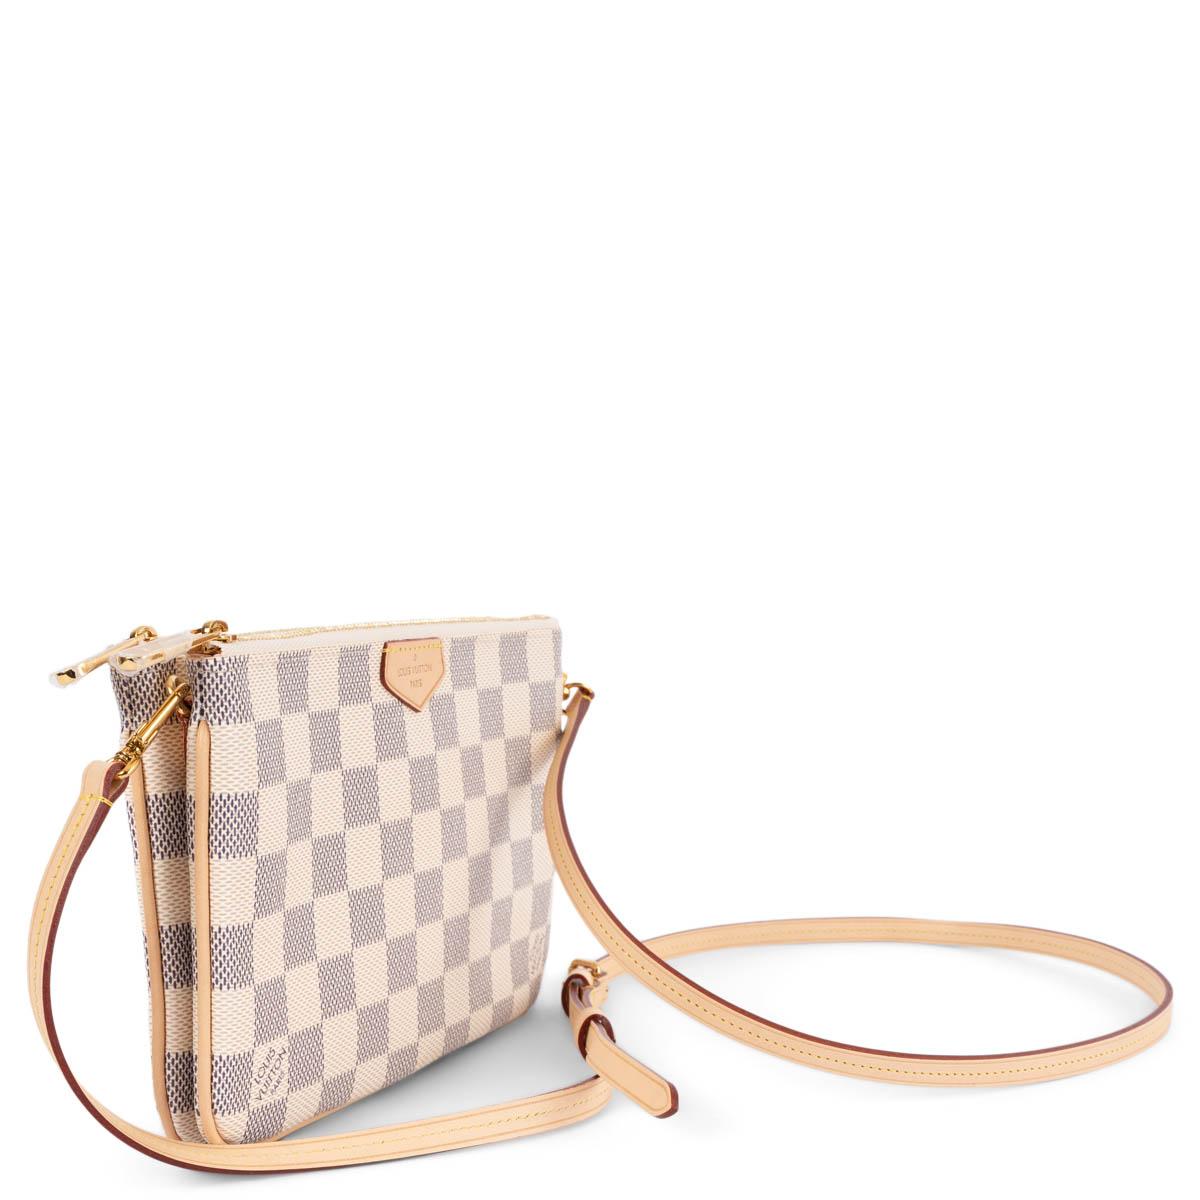 100% authentic Louis Vuitton Double Zip pochette in Damier Azur canvas. Features removable and adjustable natural cowhide leather strap, trims and logo tab and gold-tone hardware. Two zipped pockets with open pocket in the middle. Lined in pink